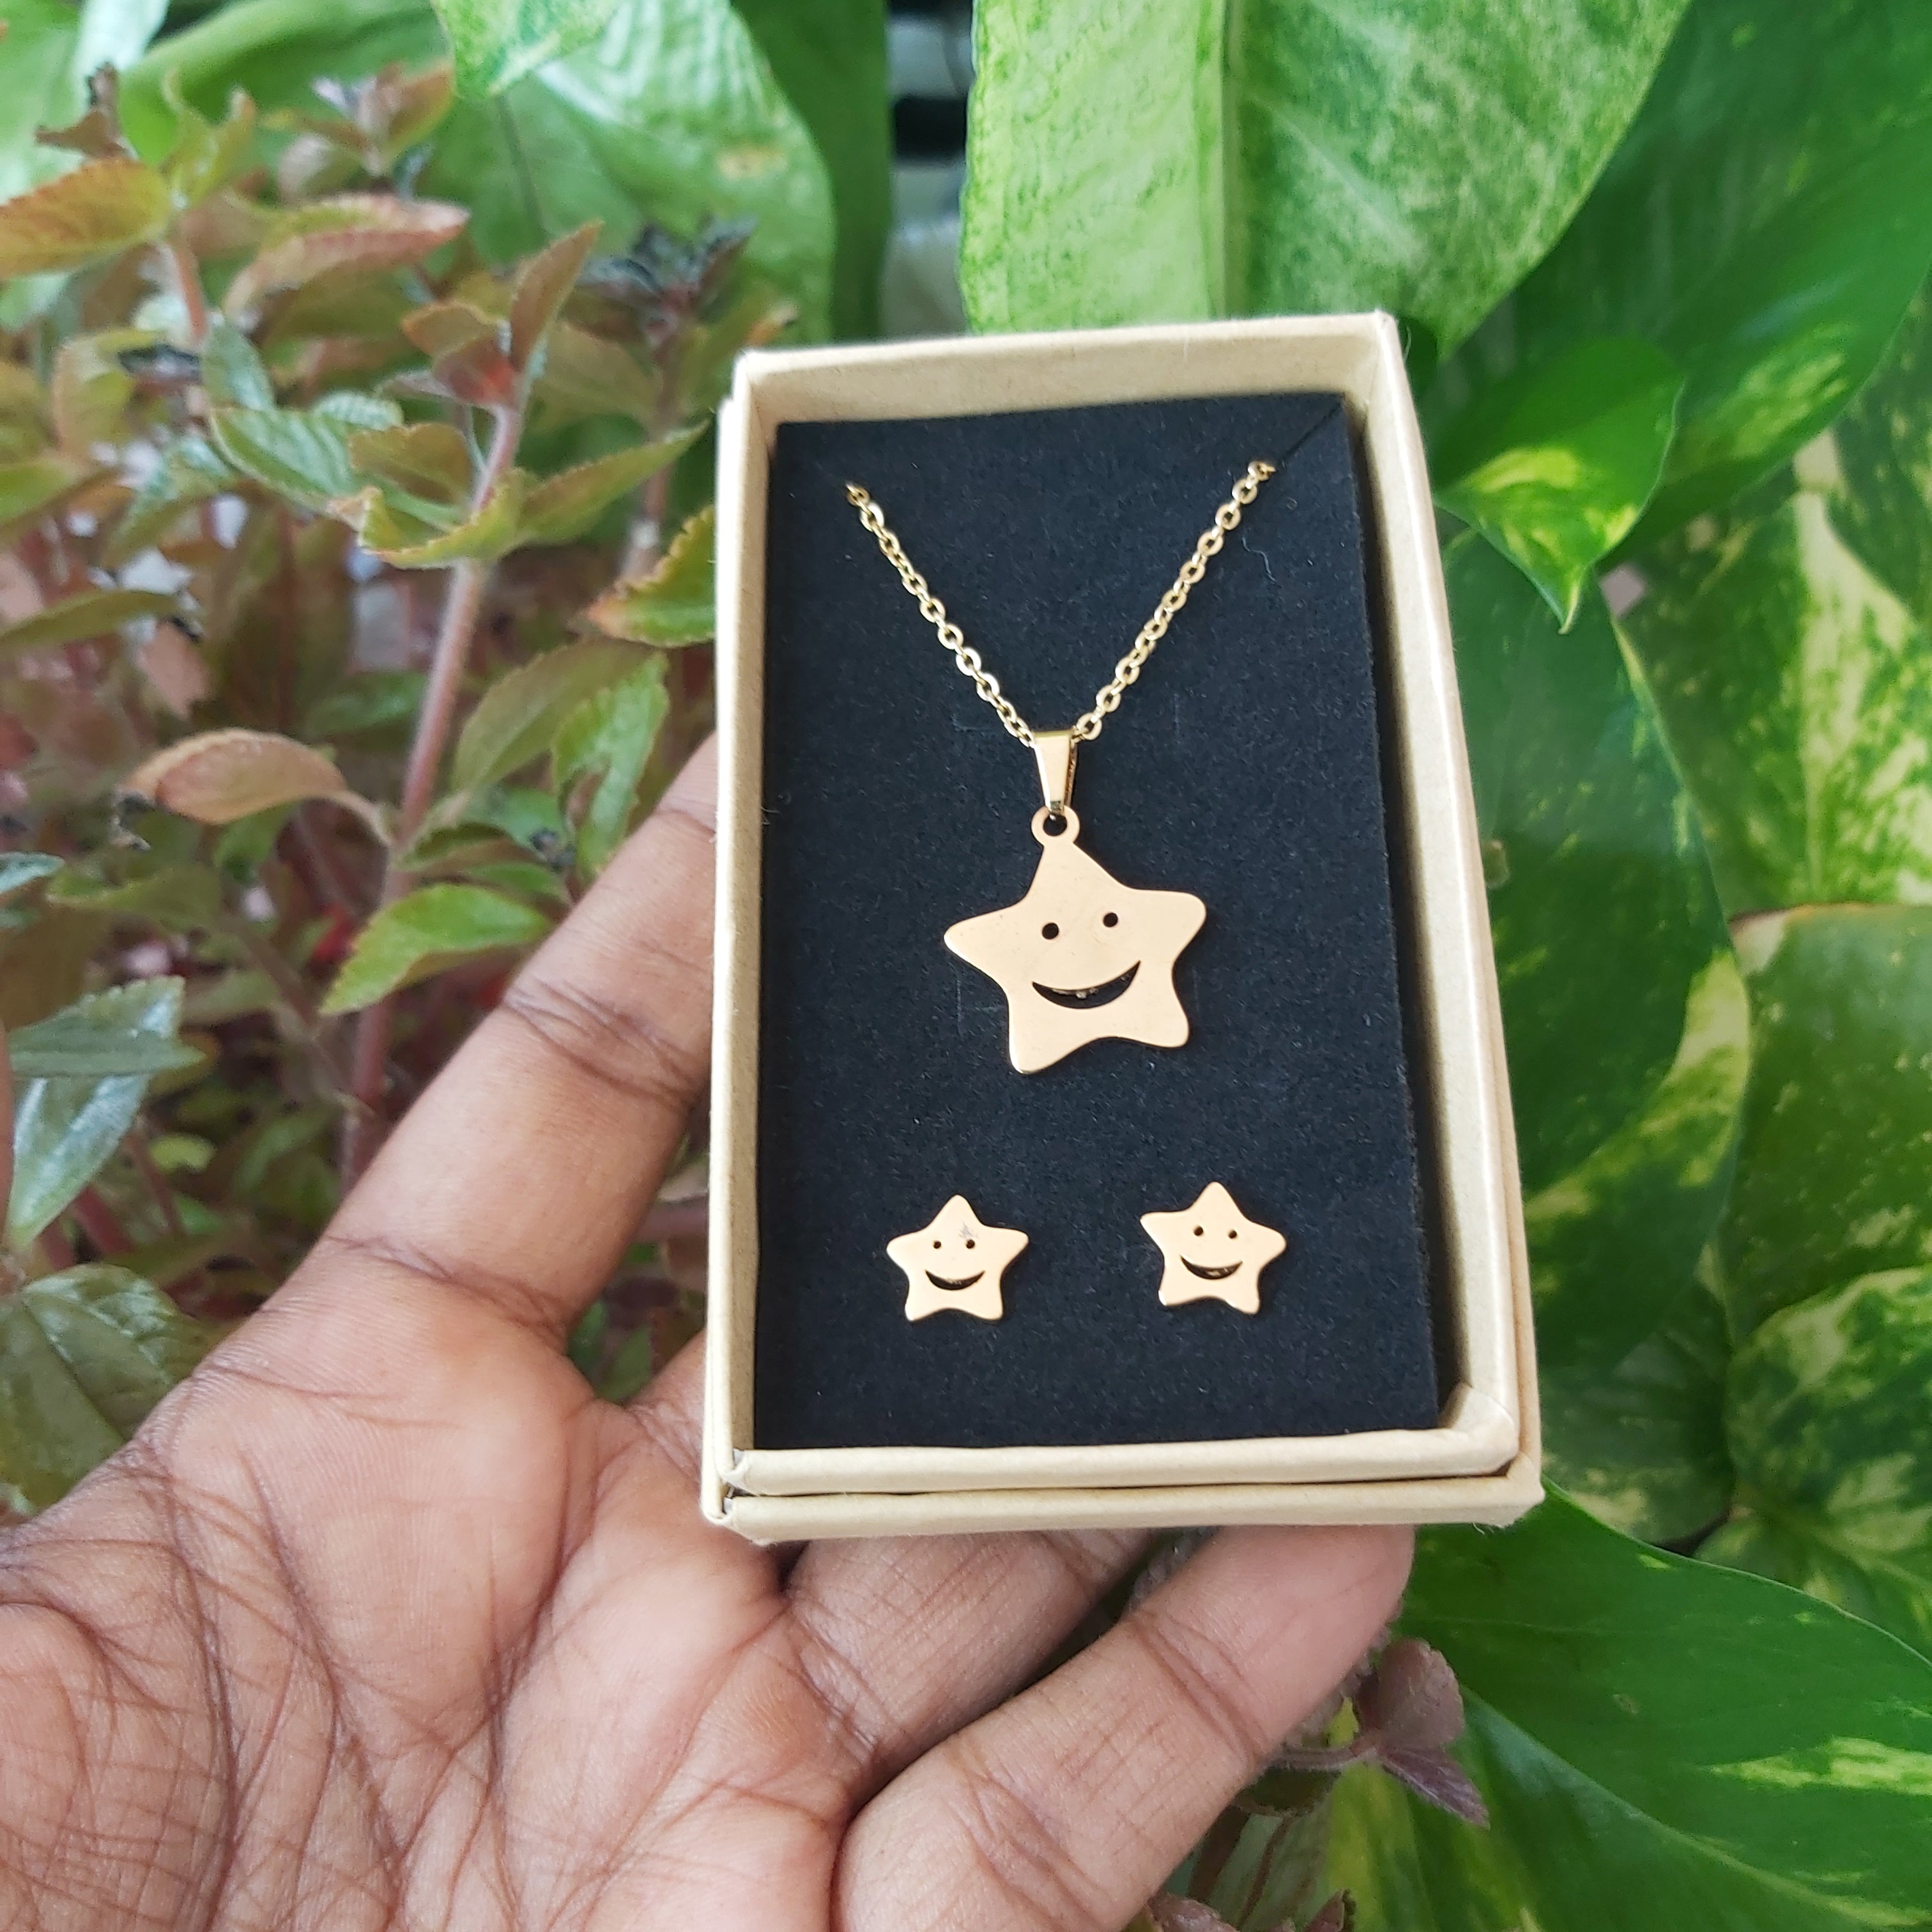 Star Smiley Face Necklace & Earrings Stainless Steel Set